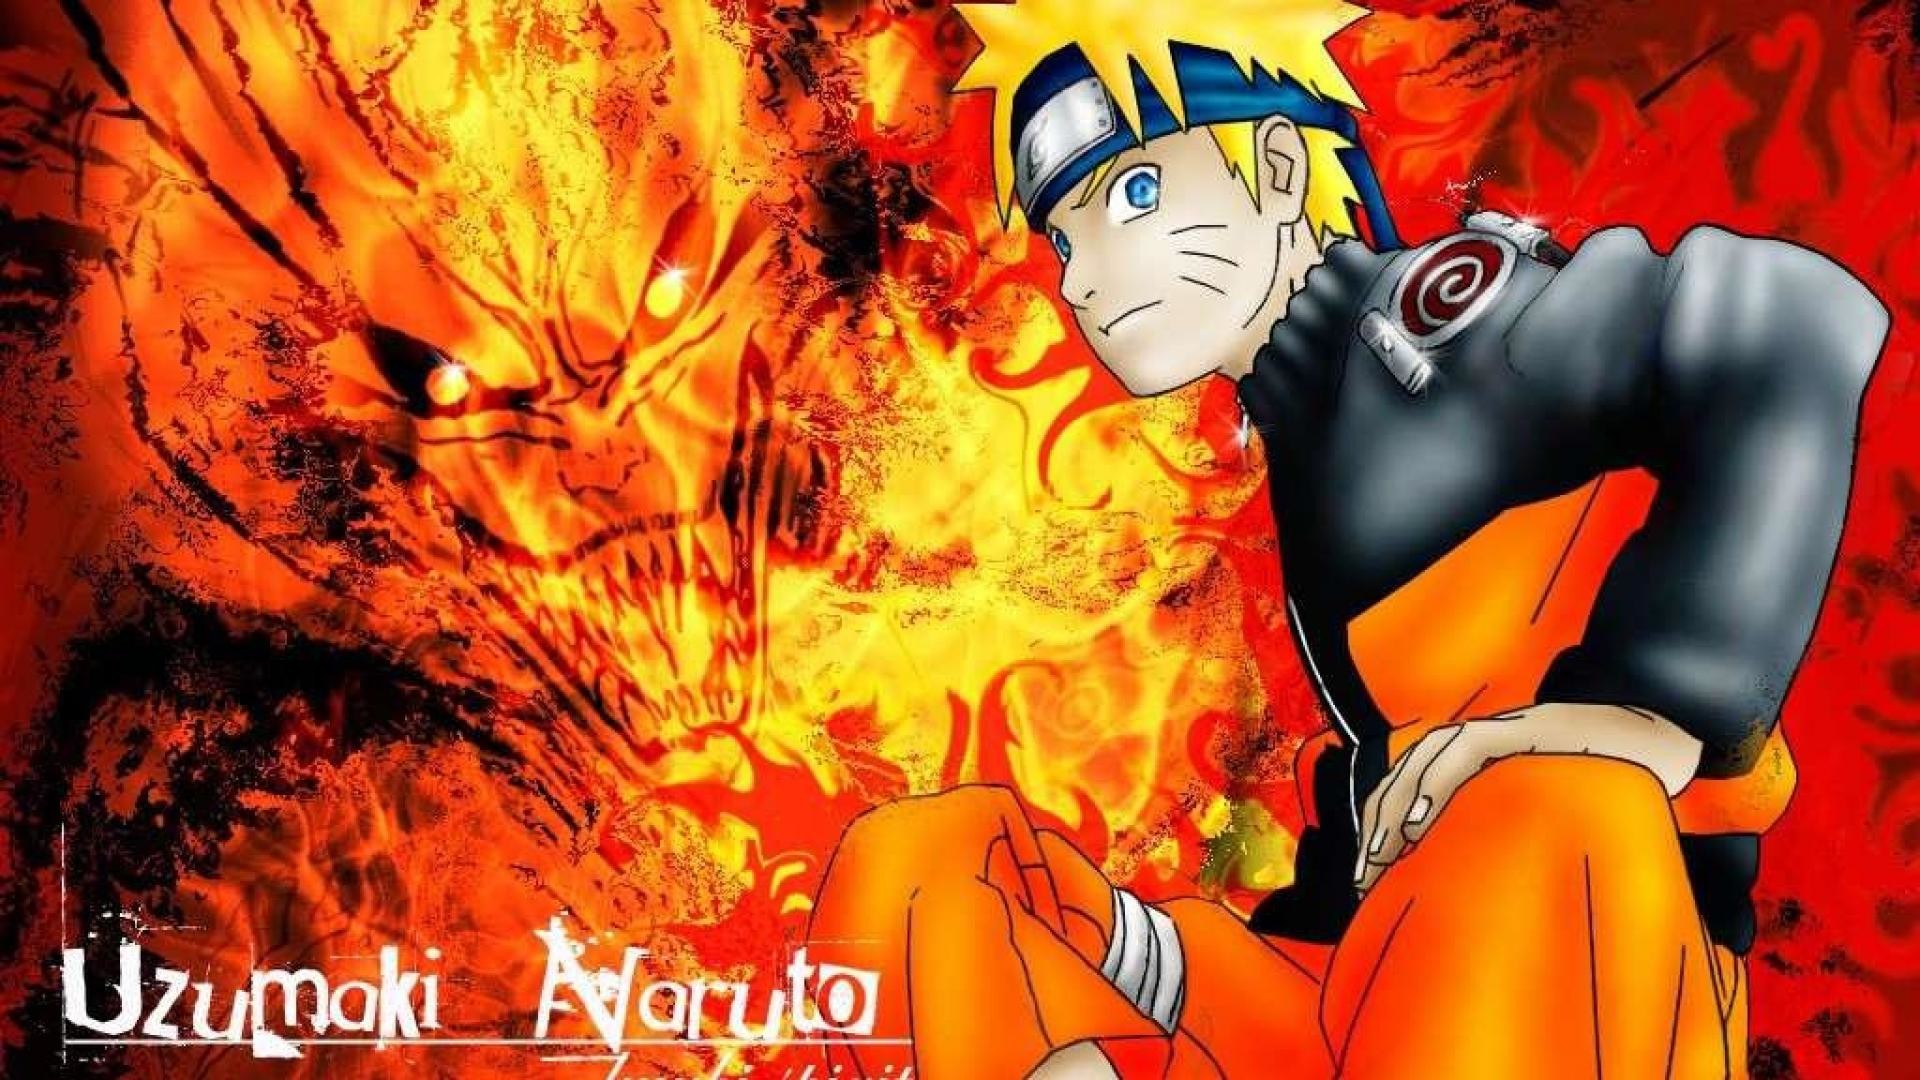 1920x1080 Naruto and nine tails - (#99028) - High Quality and Resolution .